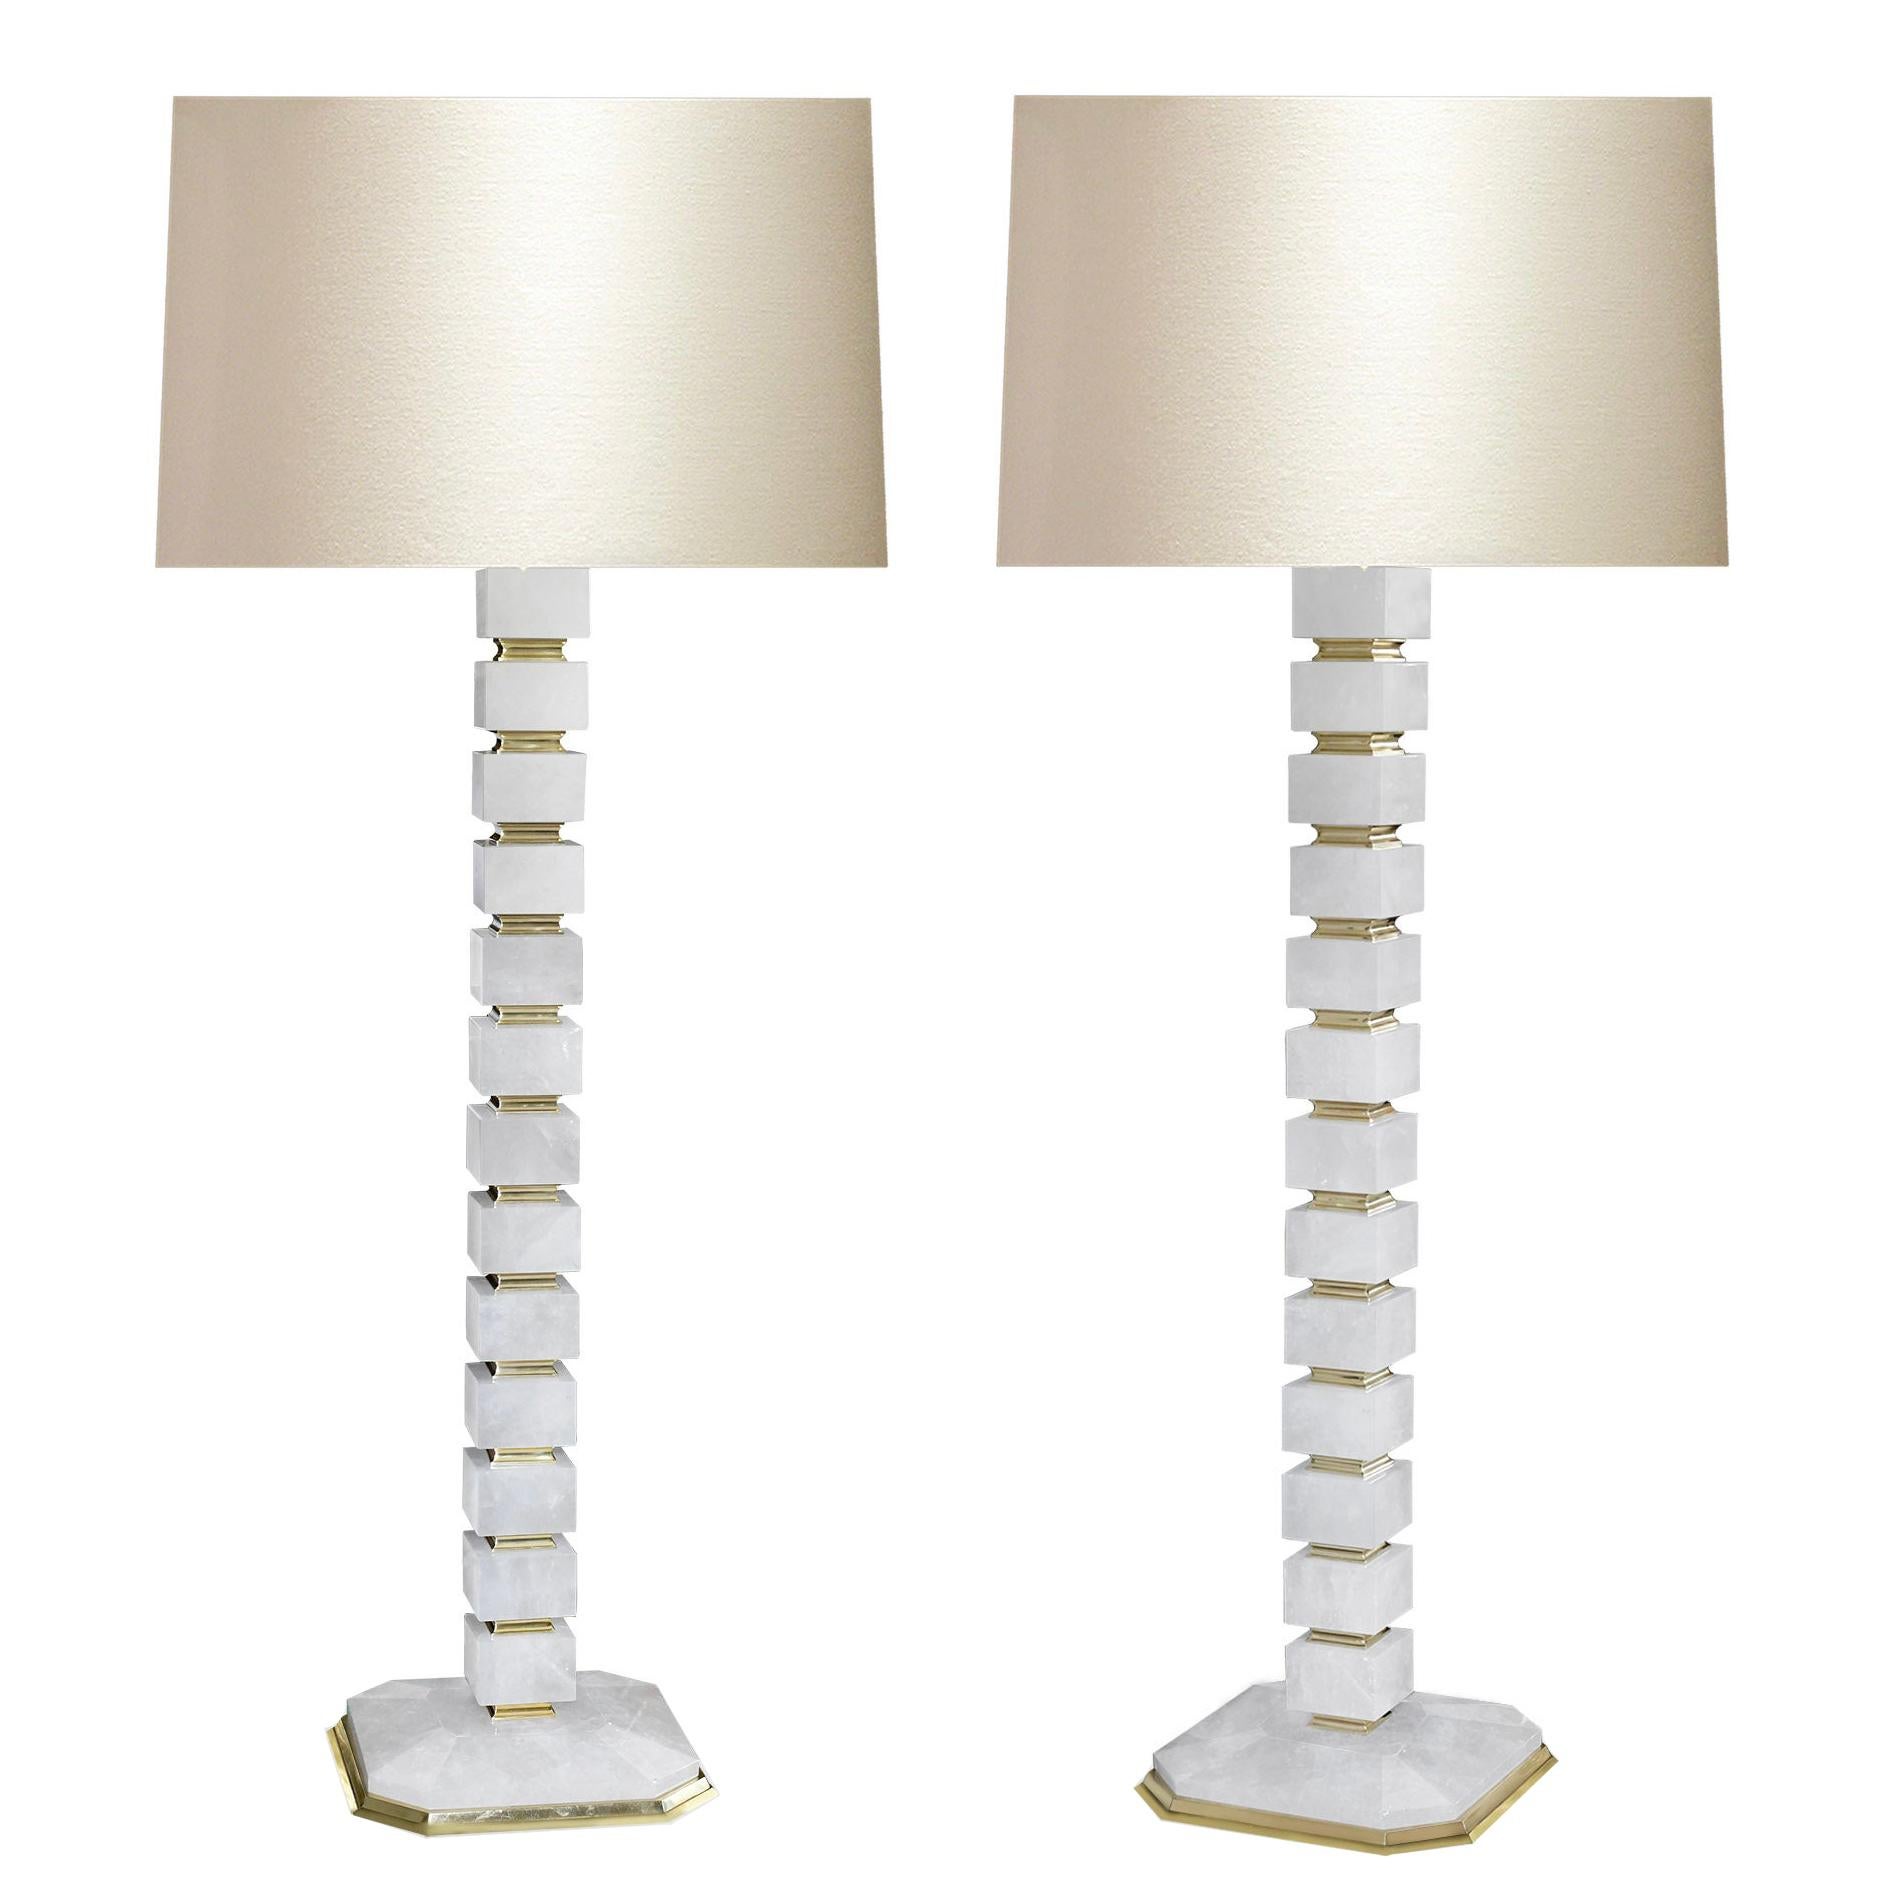 Pair of Contemporary Block Form Rock Crystal Floor Lamps by Phoenix